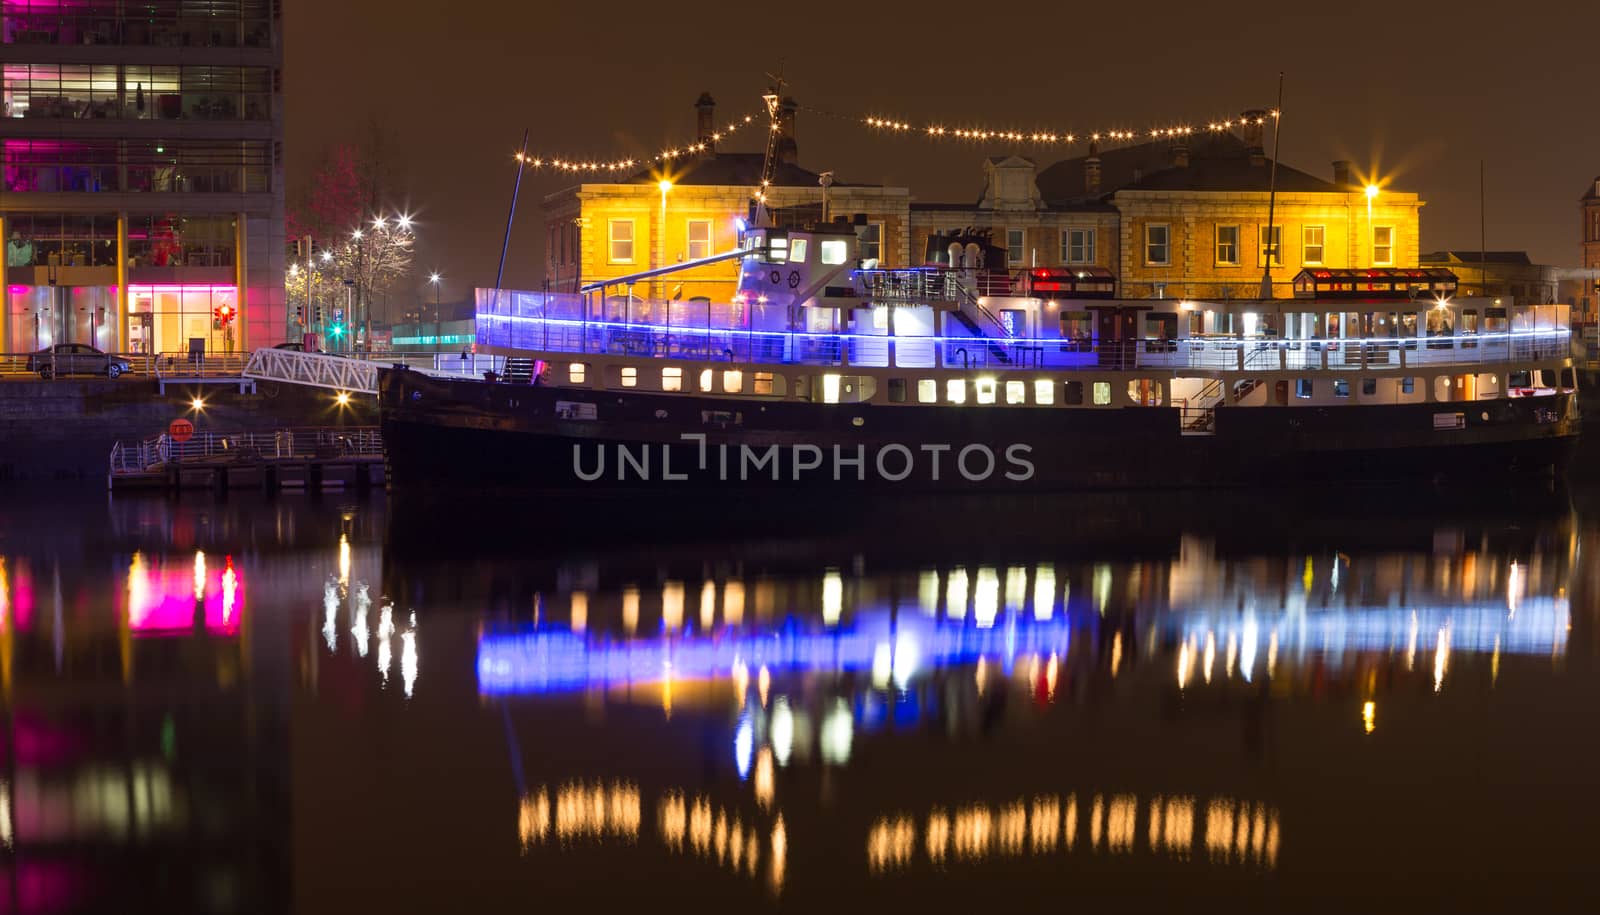 Party boat with lights on river liffey dublin ireland at night